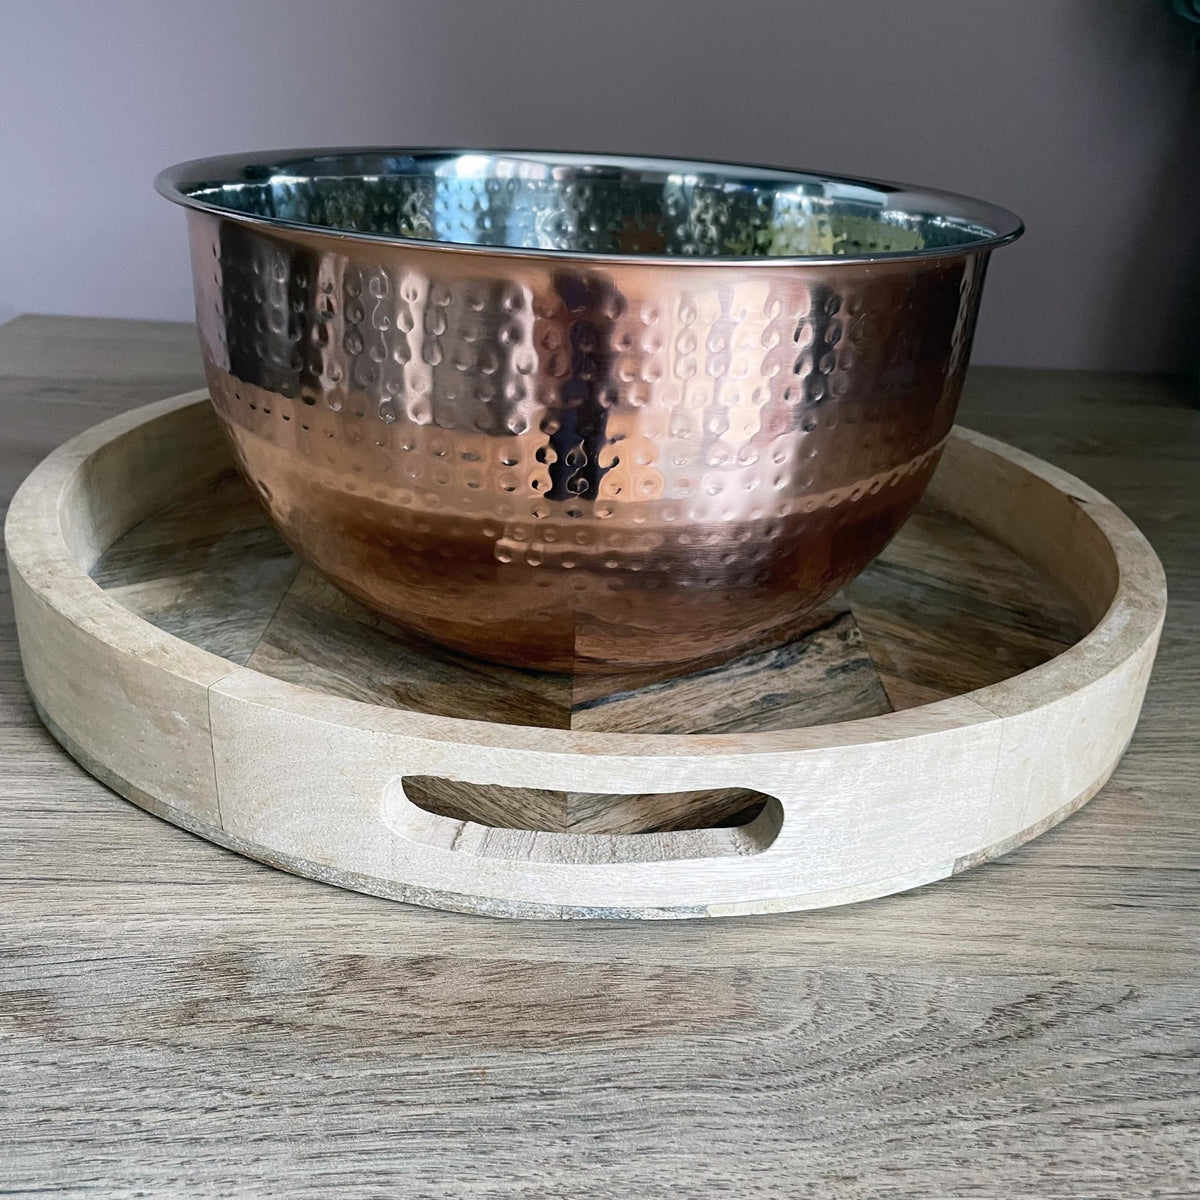 Large Hammered Copper-style Bowl on a wooden serving tray